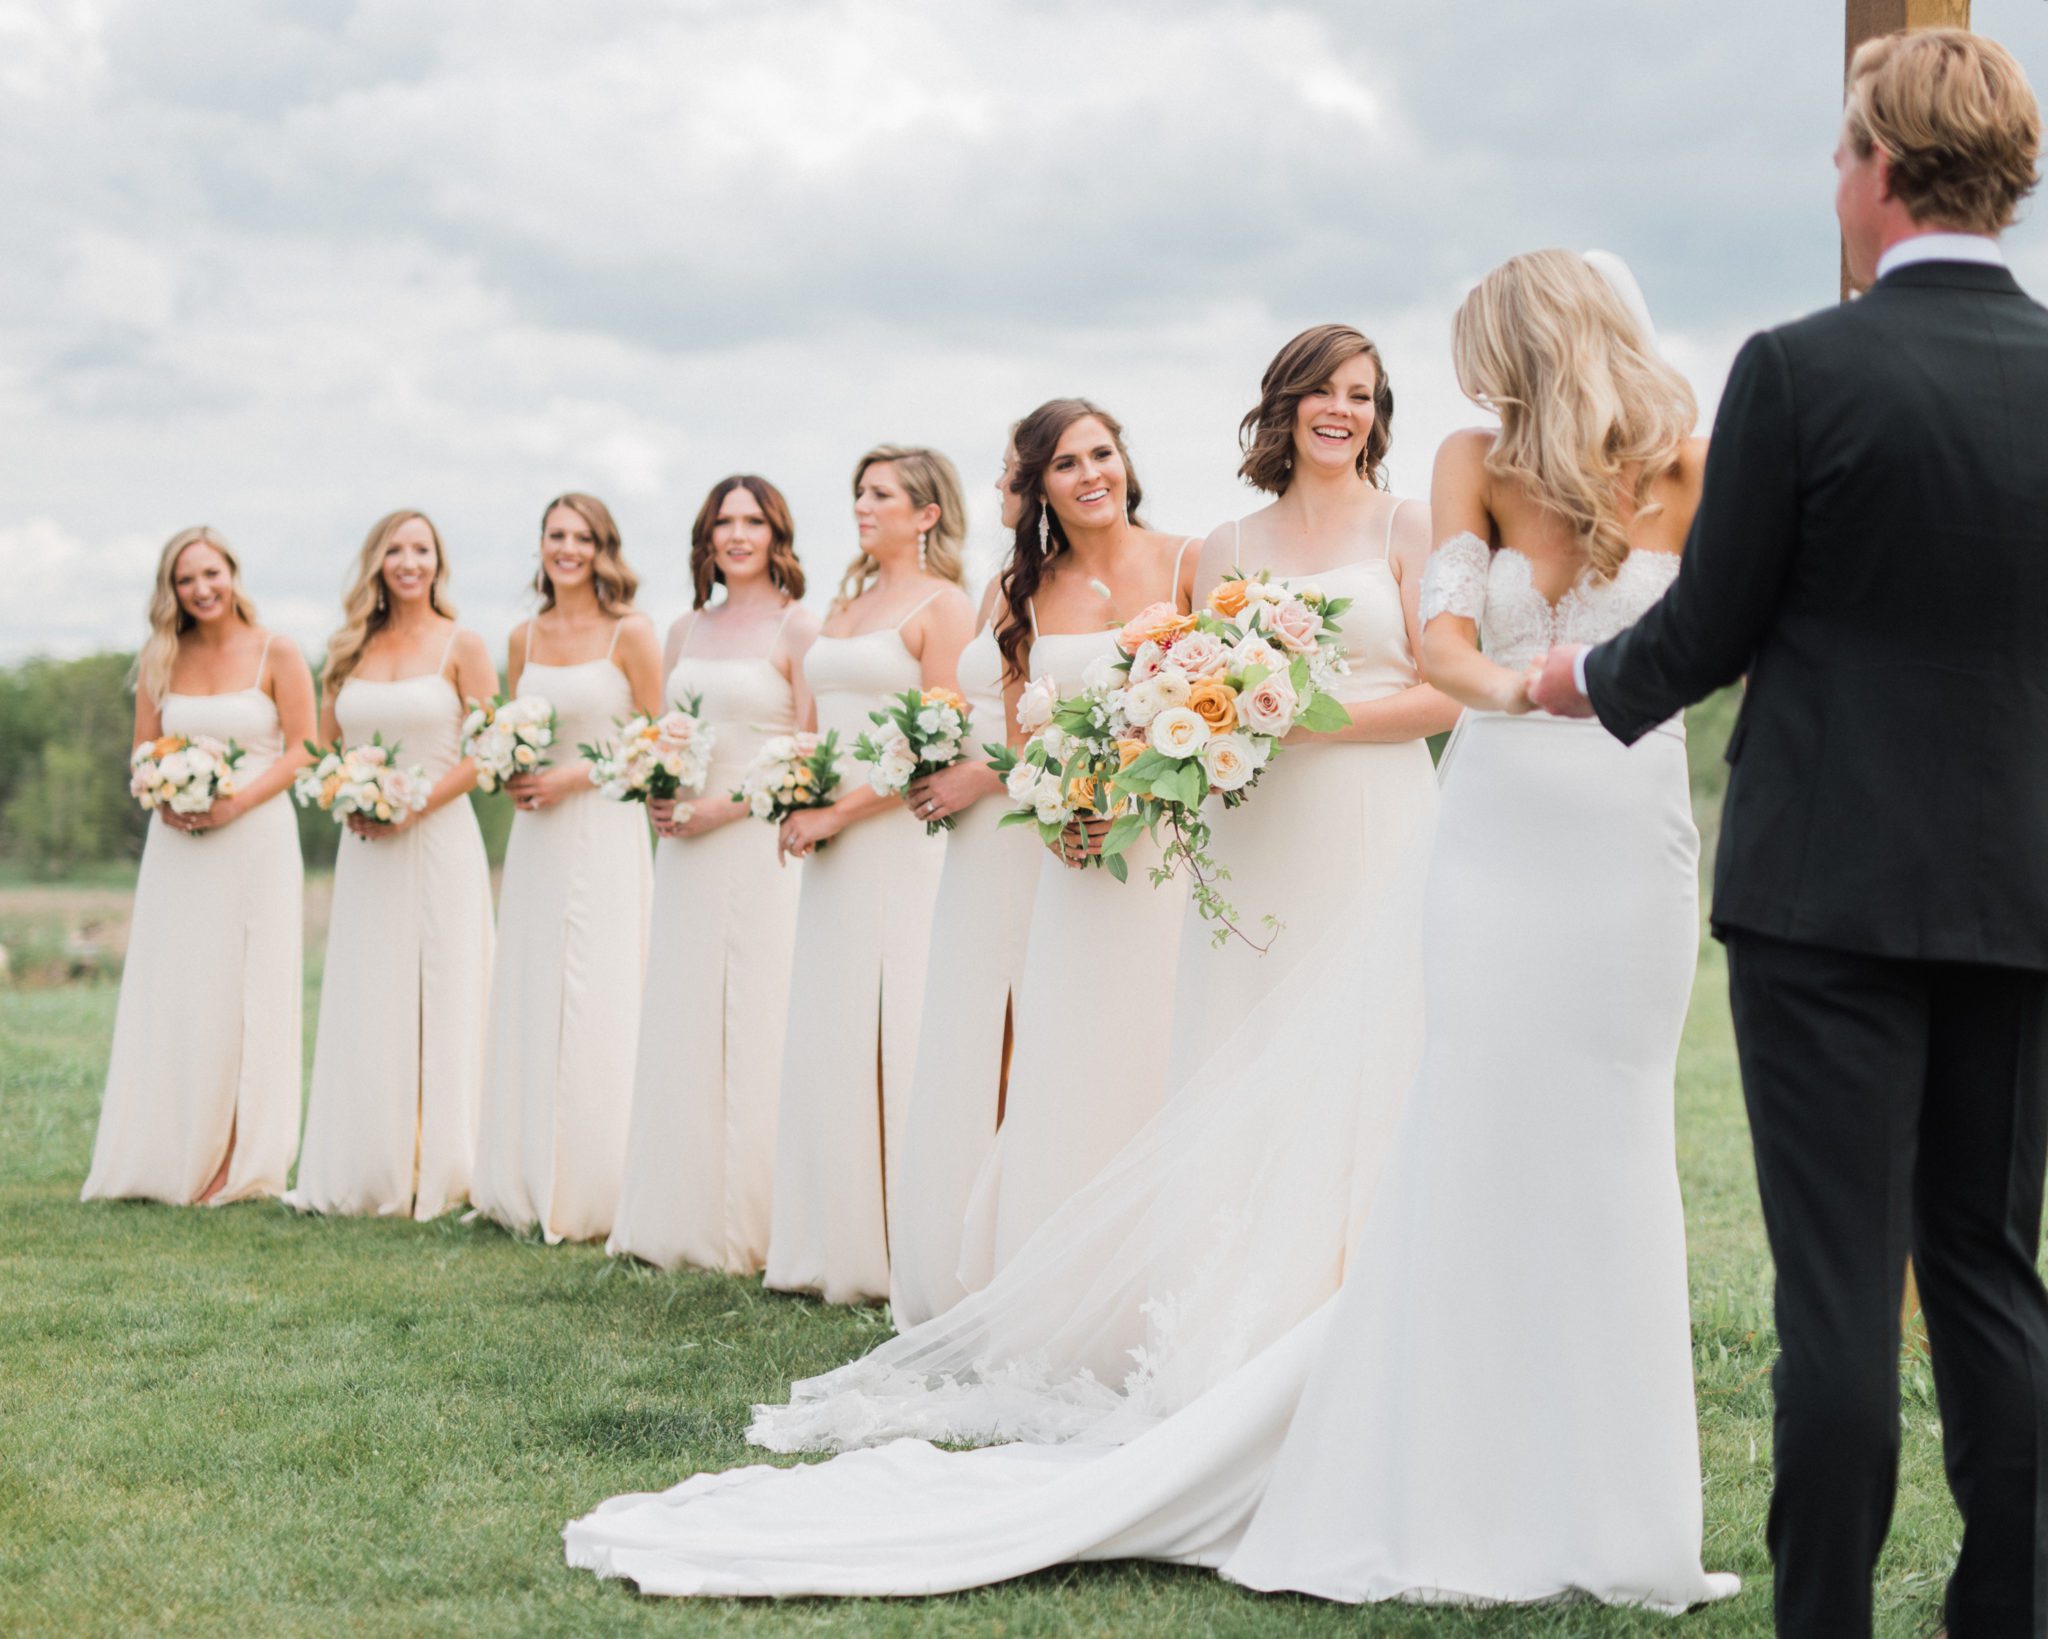 Timeless Details in Cream and Peach in this Classic Wedding at The Barn at Wind's Edge